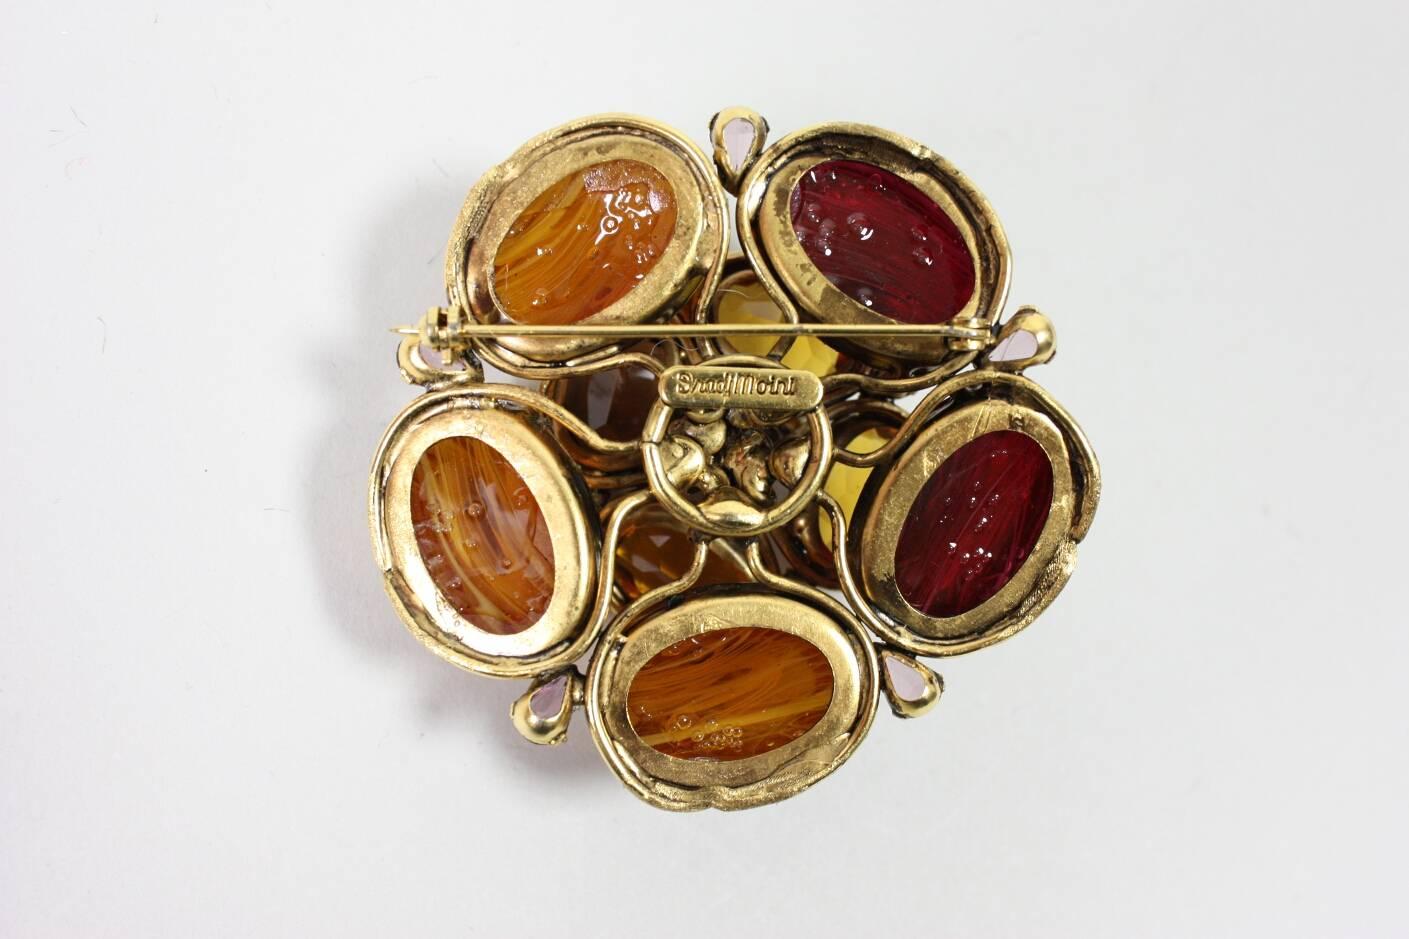 Gorgeous flower brooch from Iradj Moini is in the shape of a three-dimensional flower.  Gold-toned hardware.

Measurements-
2 1/2" Diameter
1 1/4" Tall